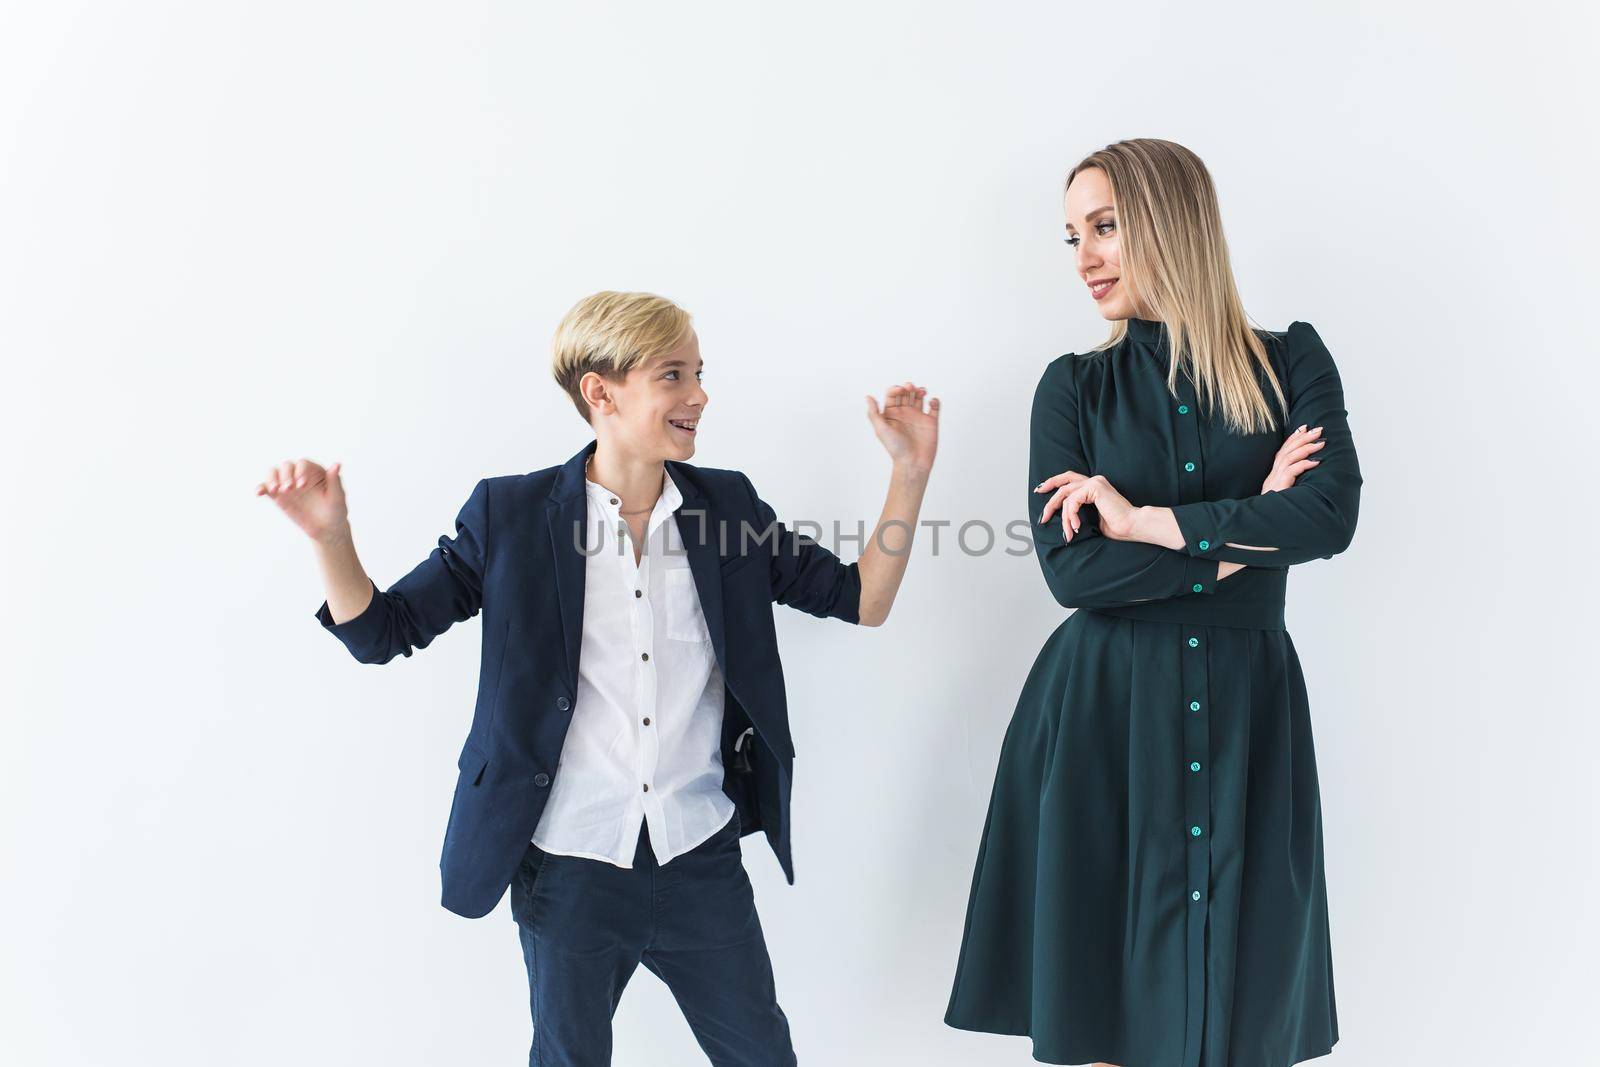 Teenager and single parent - Young mother and son dancing together on white background. by Satura86